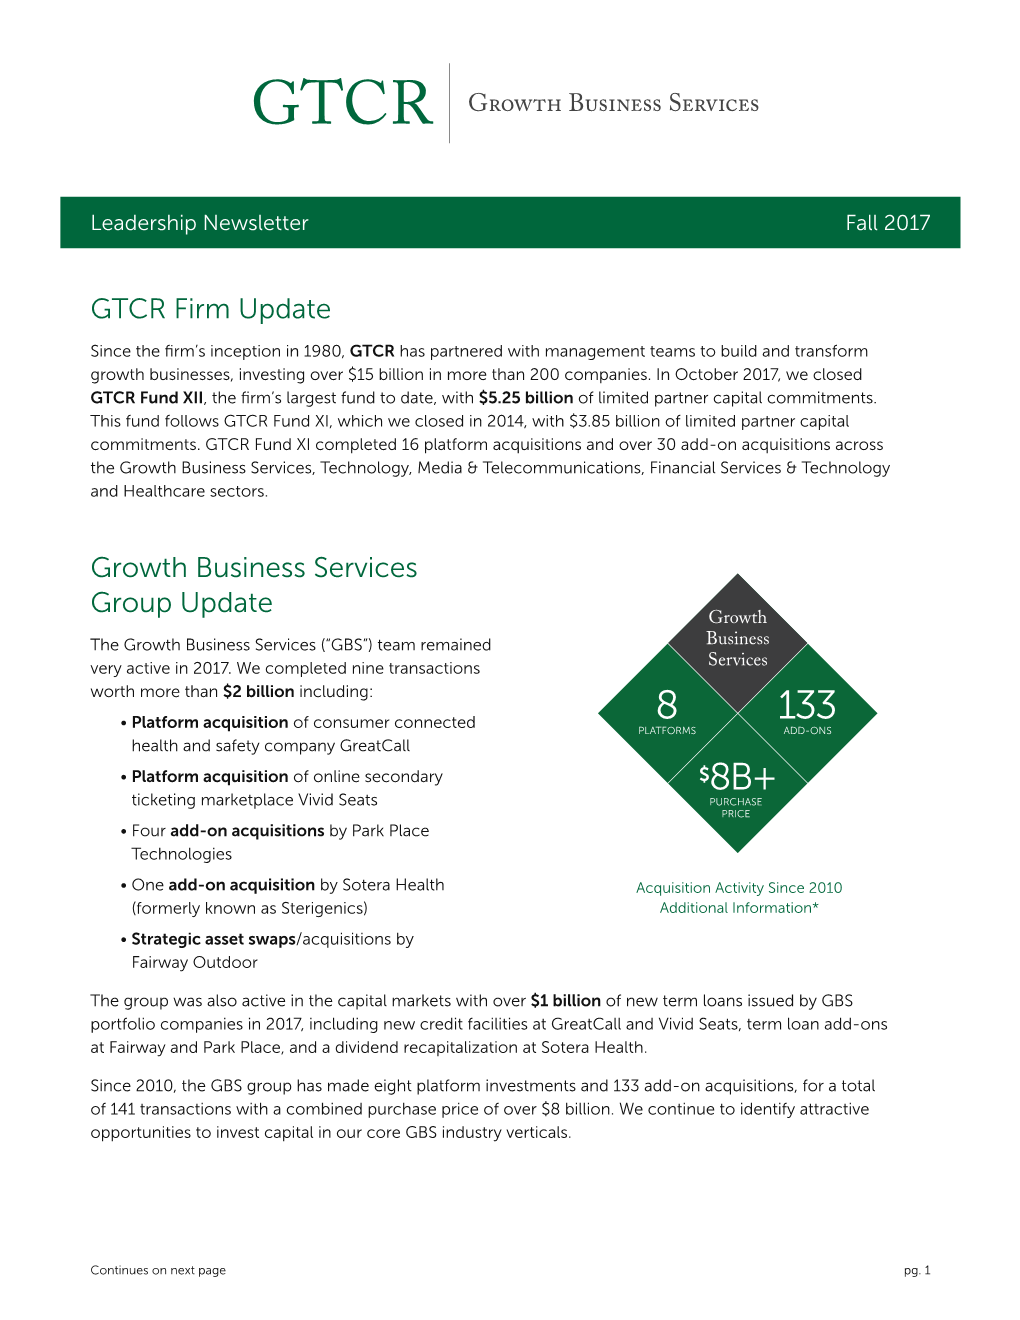 GTCR Firm Update Growth Business Services Group Update